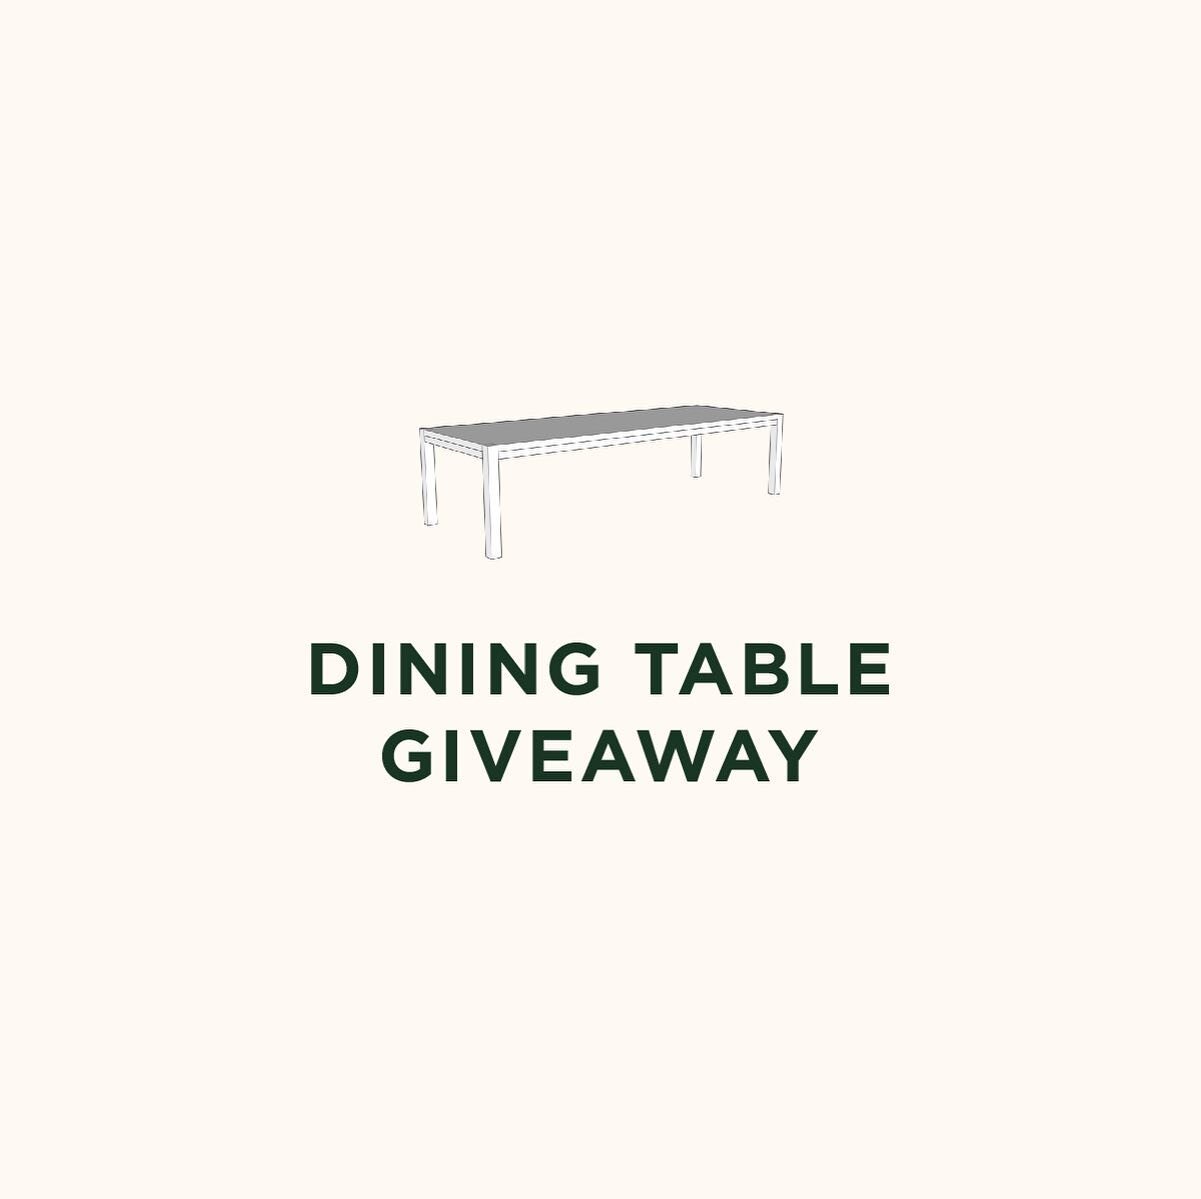 happy monday &mdash; we&rsquo;ve got some good news. with the holidays approaching, we wanted to do a little giveaway as a thank you to our clients + followers. we couldn&rsquo;t be more grateful for the work we&rsquo;ve been apart of this year, and 